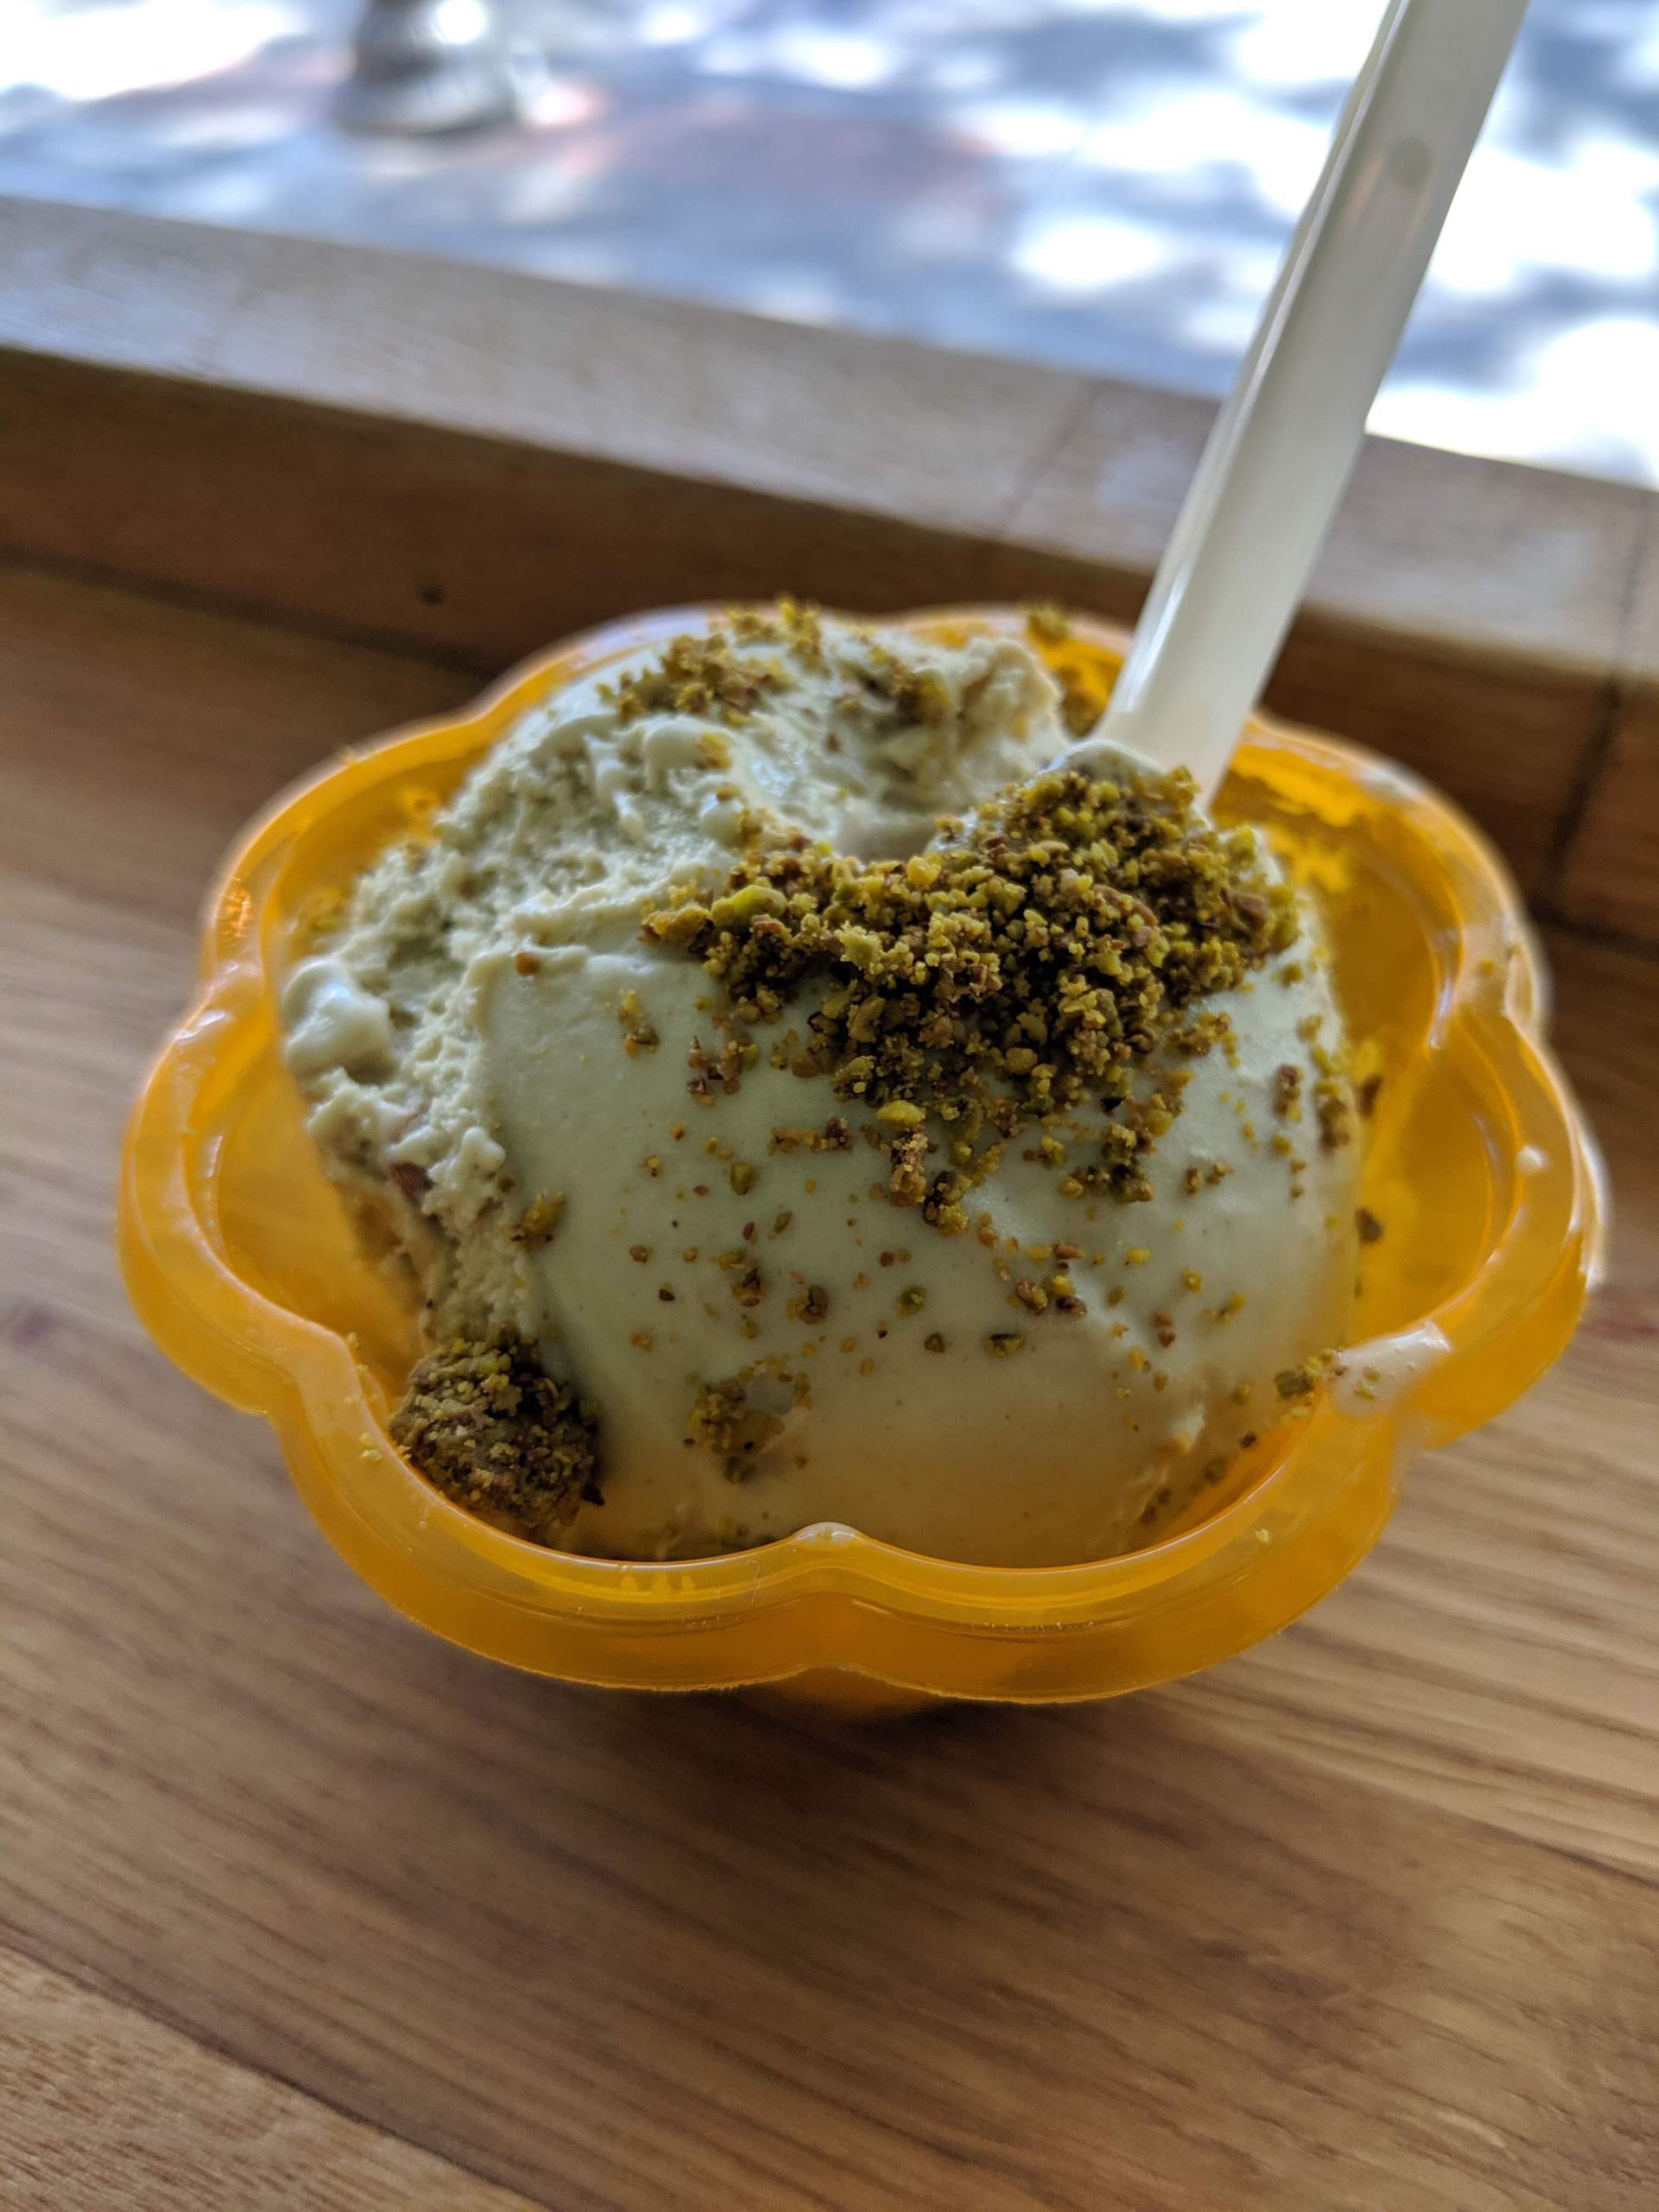 The Special Ingredient In This Gelato Buffalo Milk Kqed The ice cream was velvety and smooth on the tongue, the flavour was rich and creamy, and you instantly knew it was far superior to any ice cream you've tried before. gelato buffalo milk